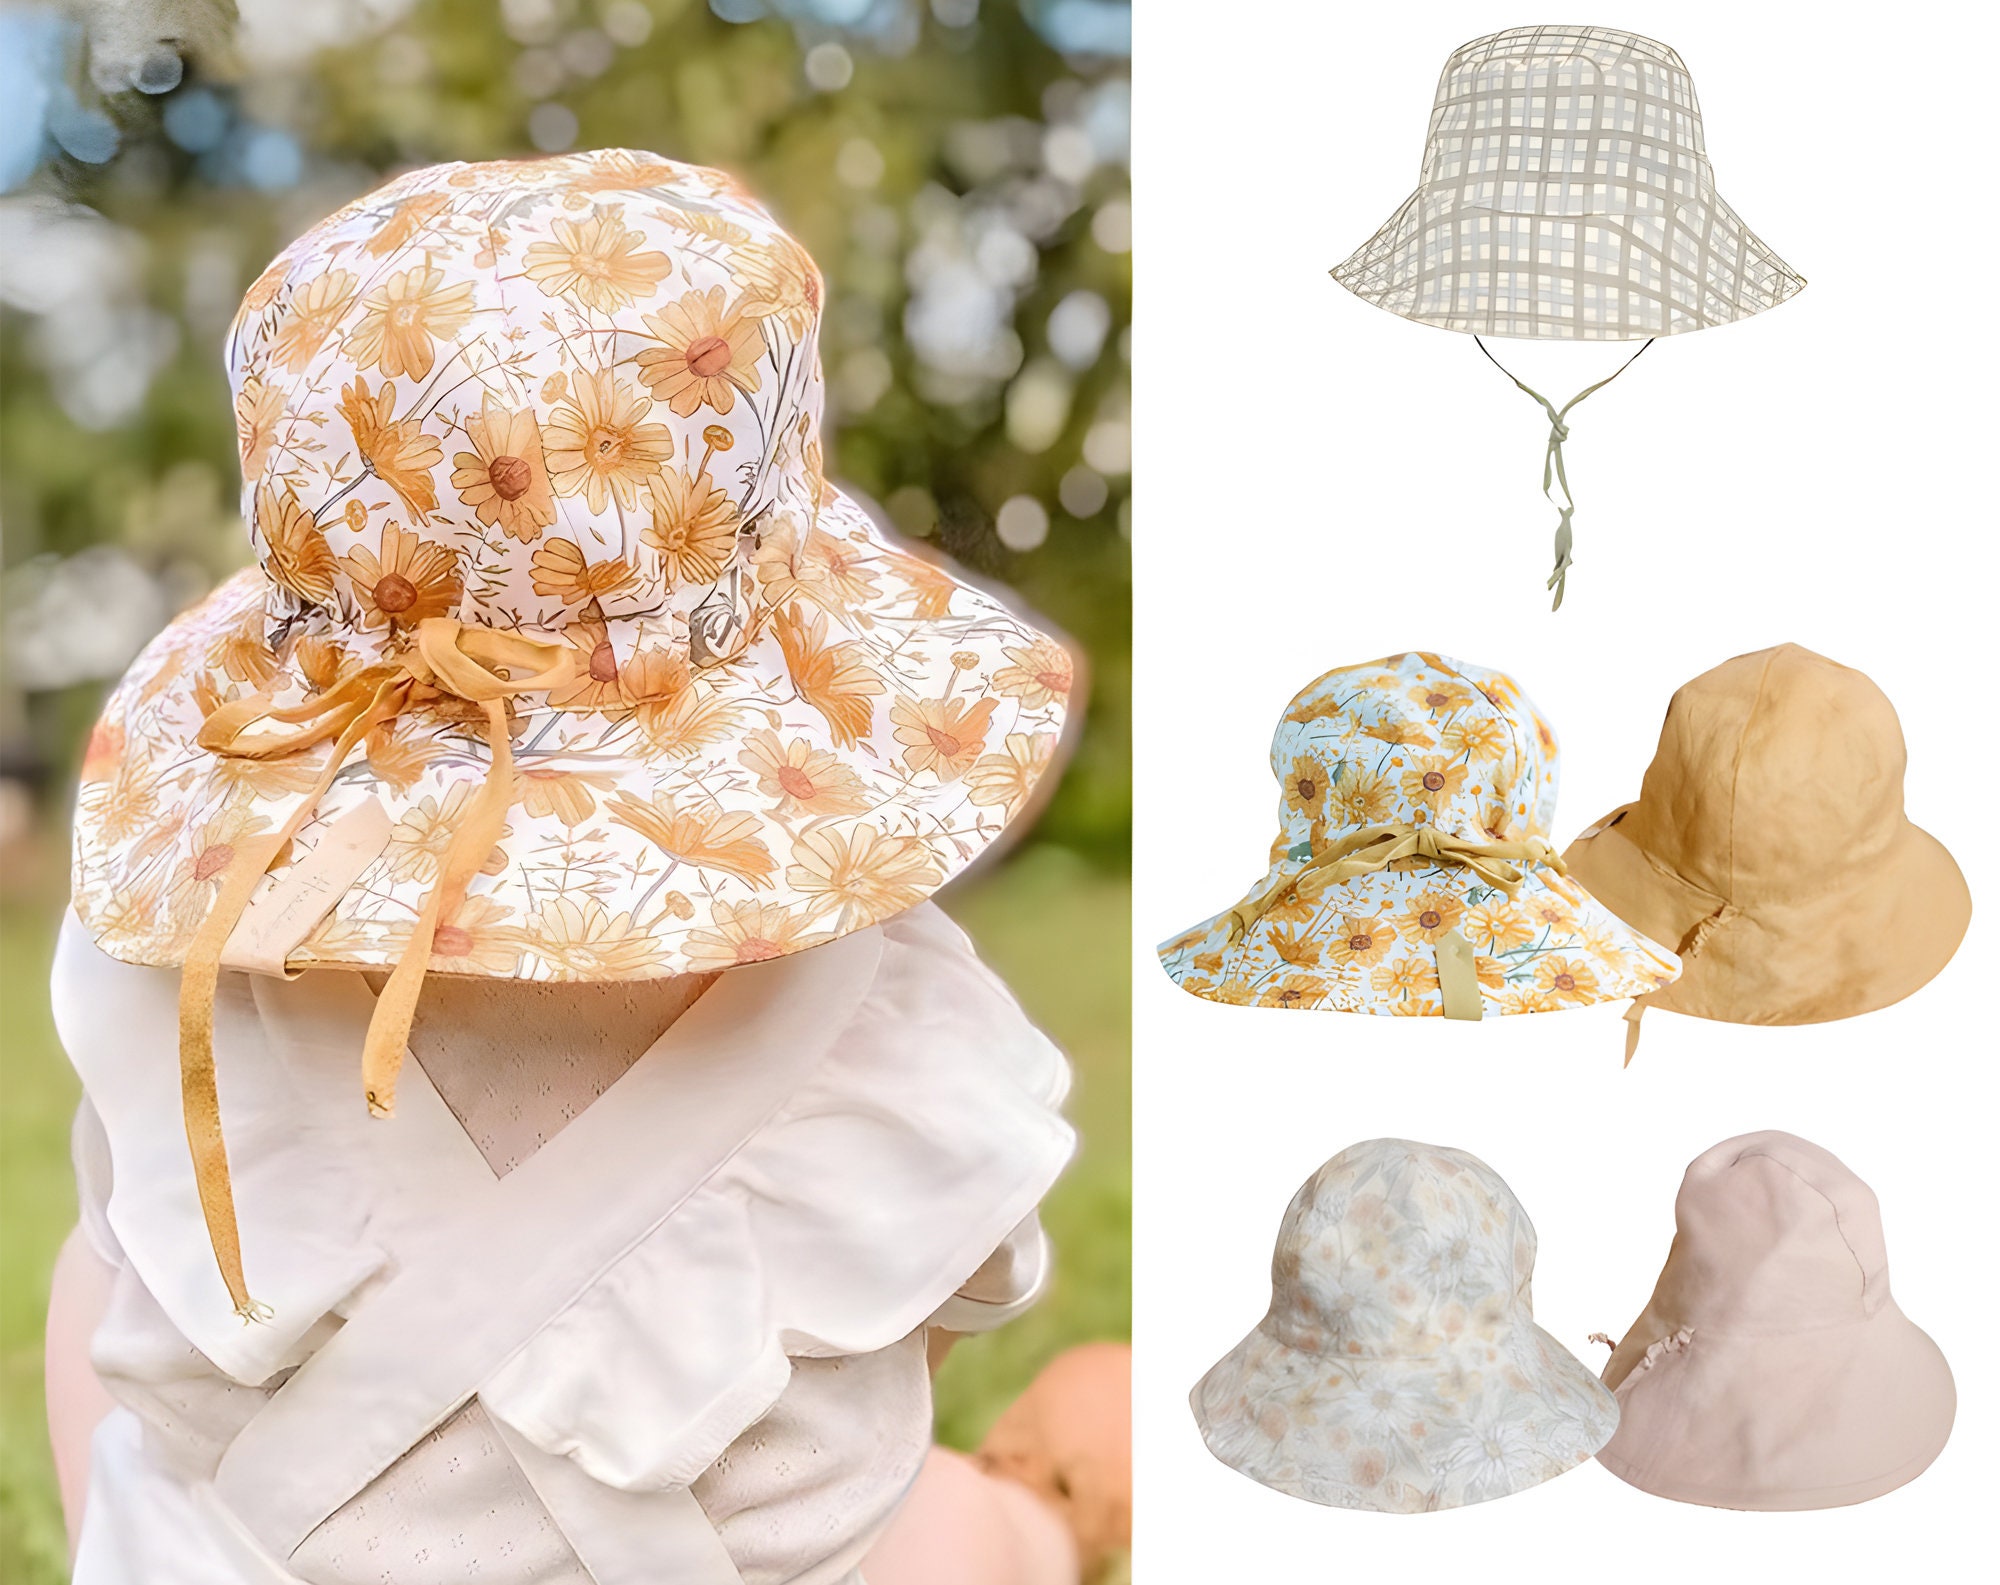 Sun hat sewing pattern  circle hat, bucket hat, adult and kids sizes –  Easily Made Patterns